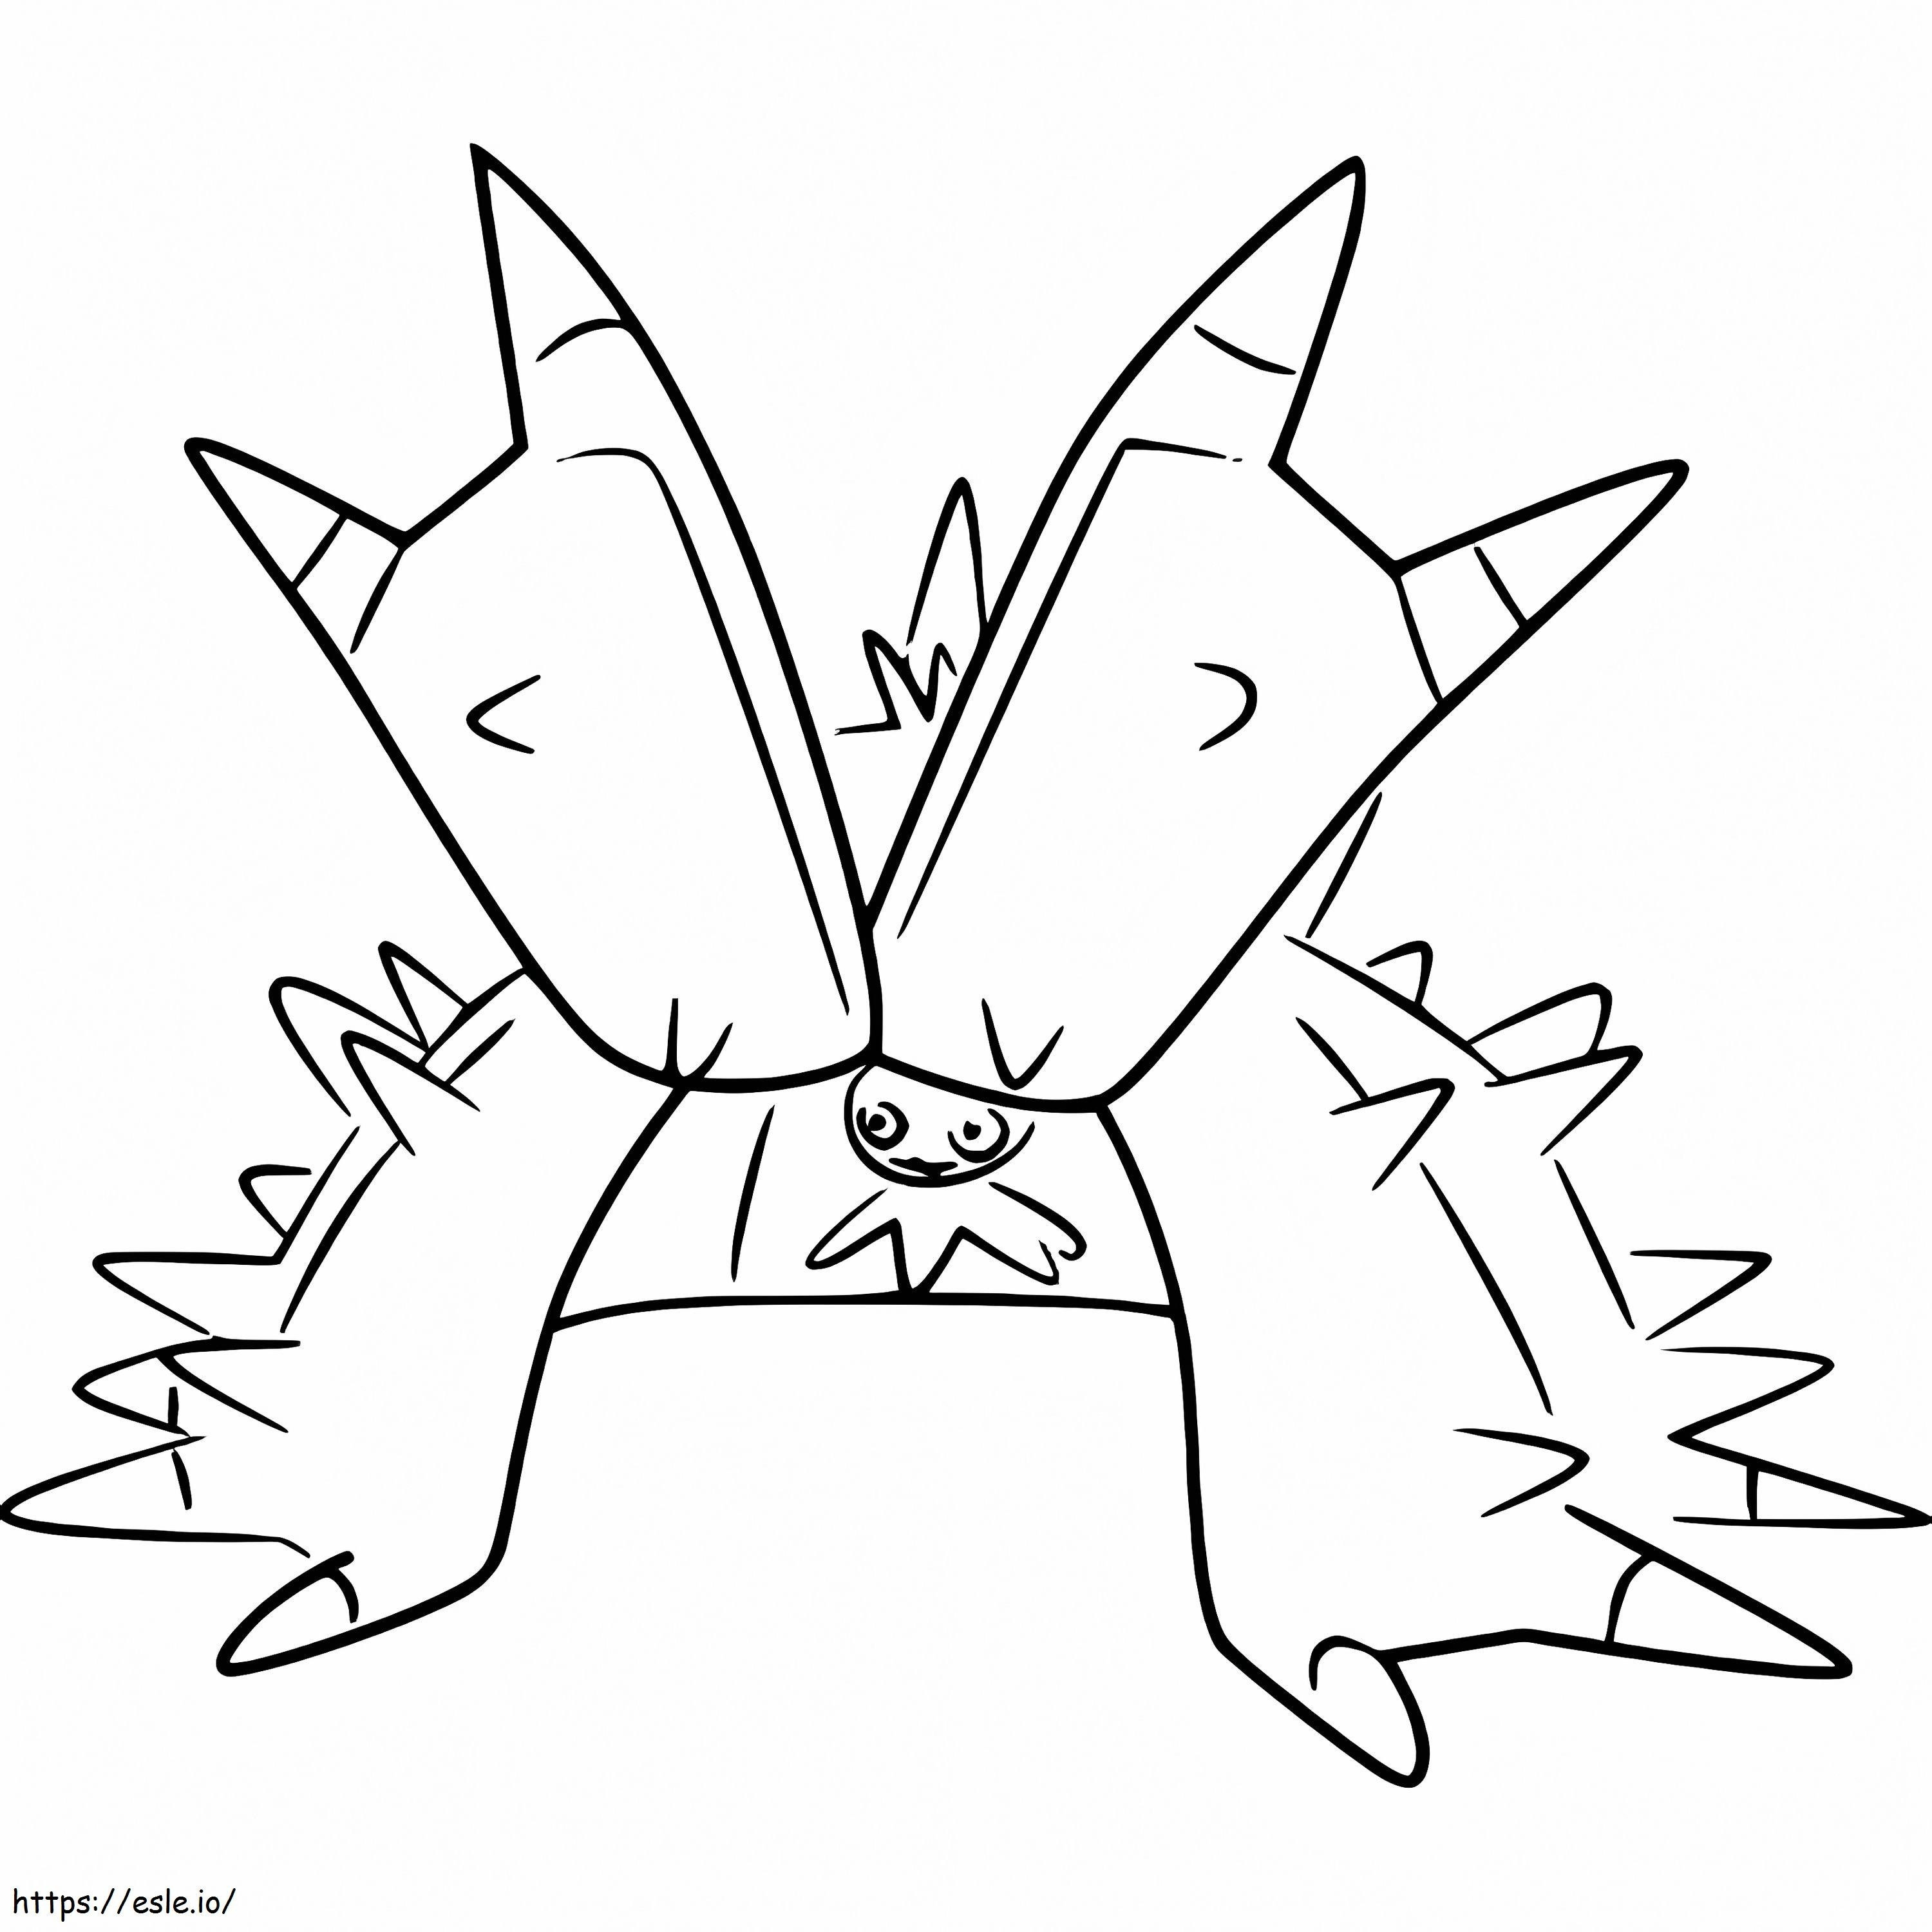 Free Toxapex Pokemon coloring page